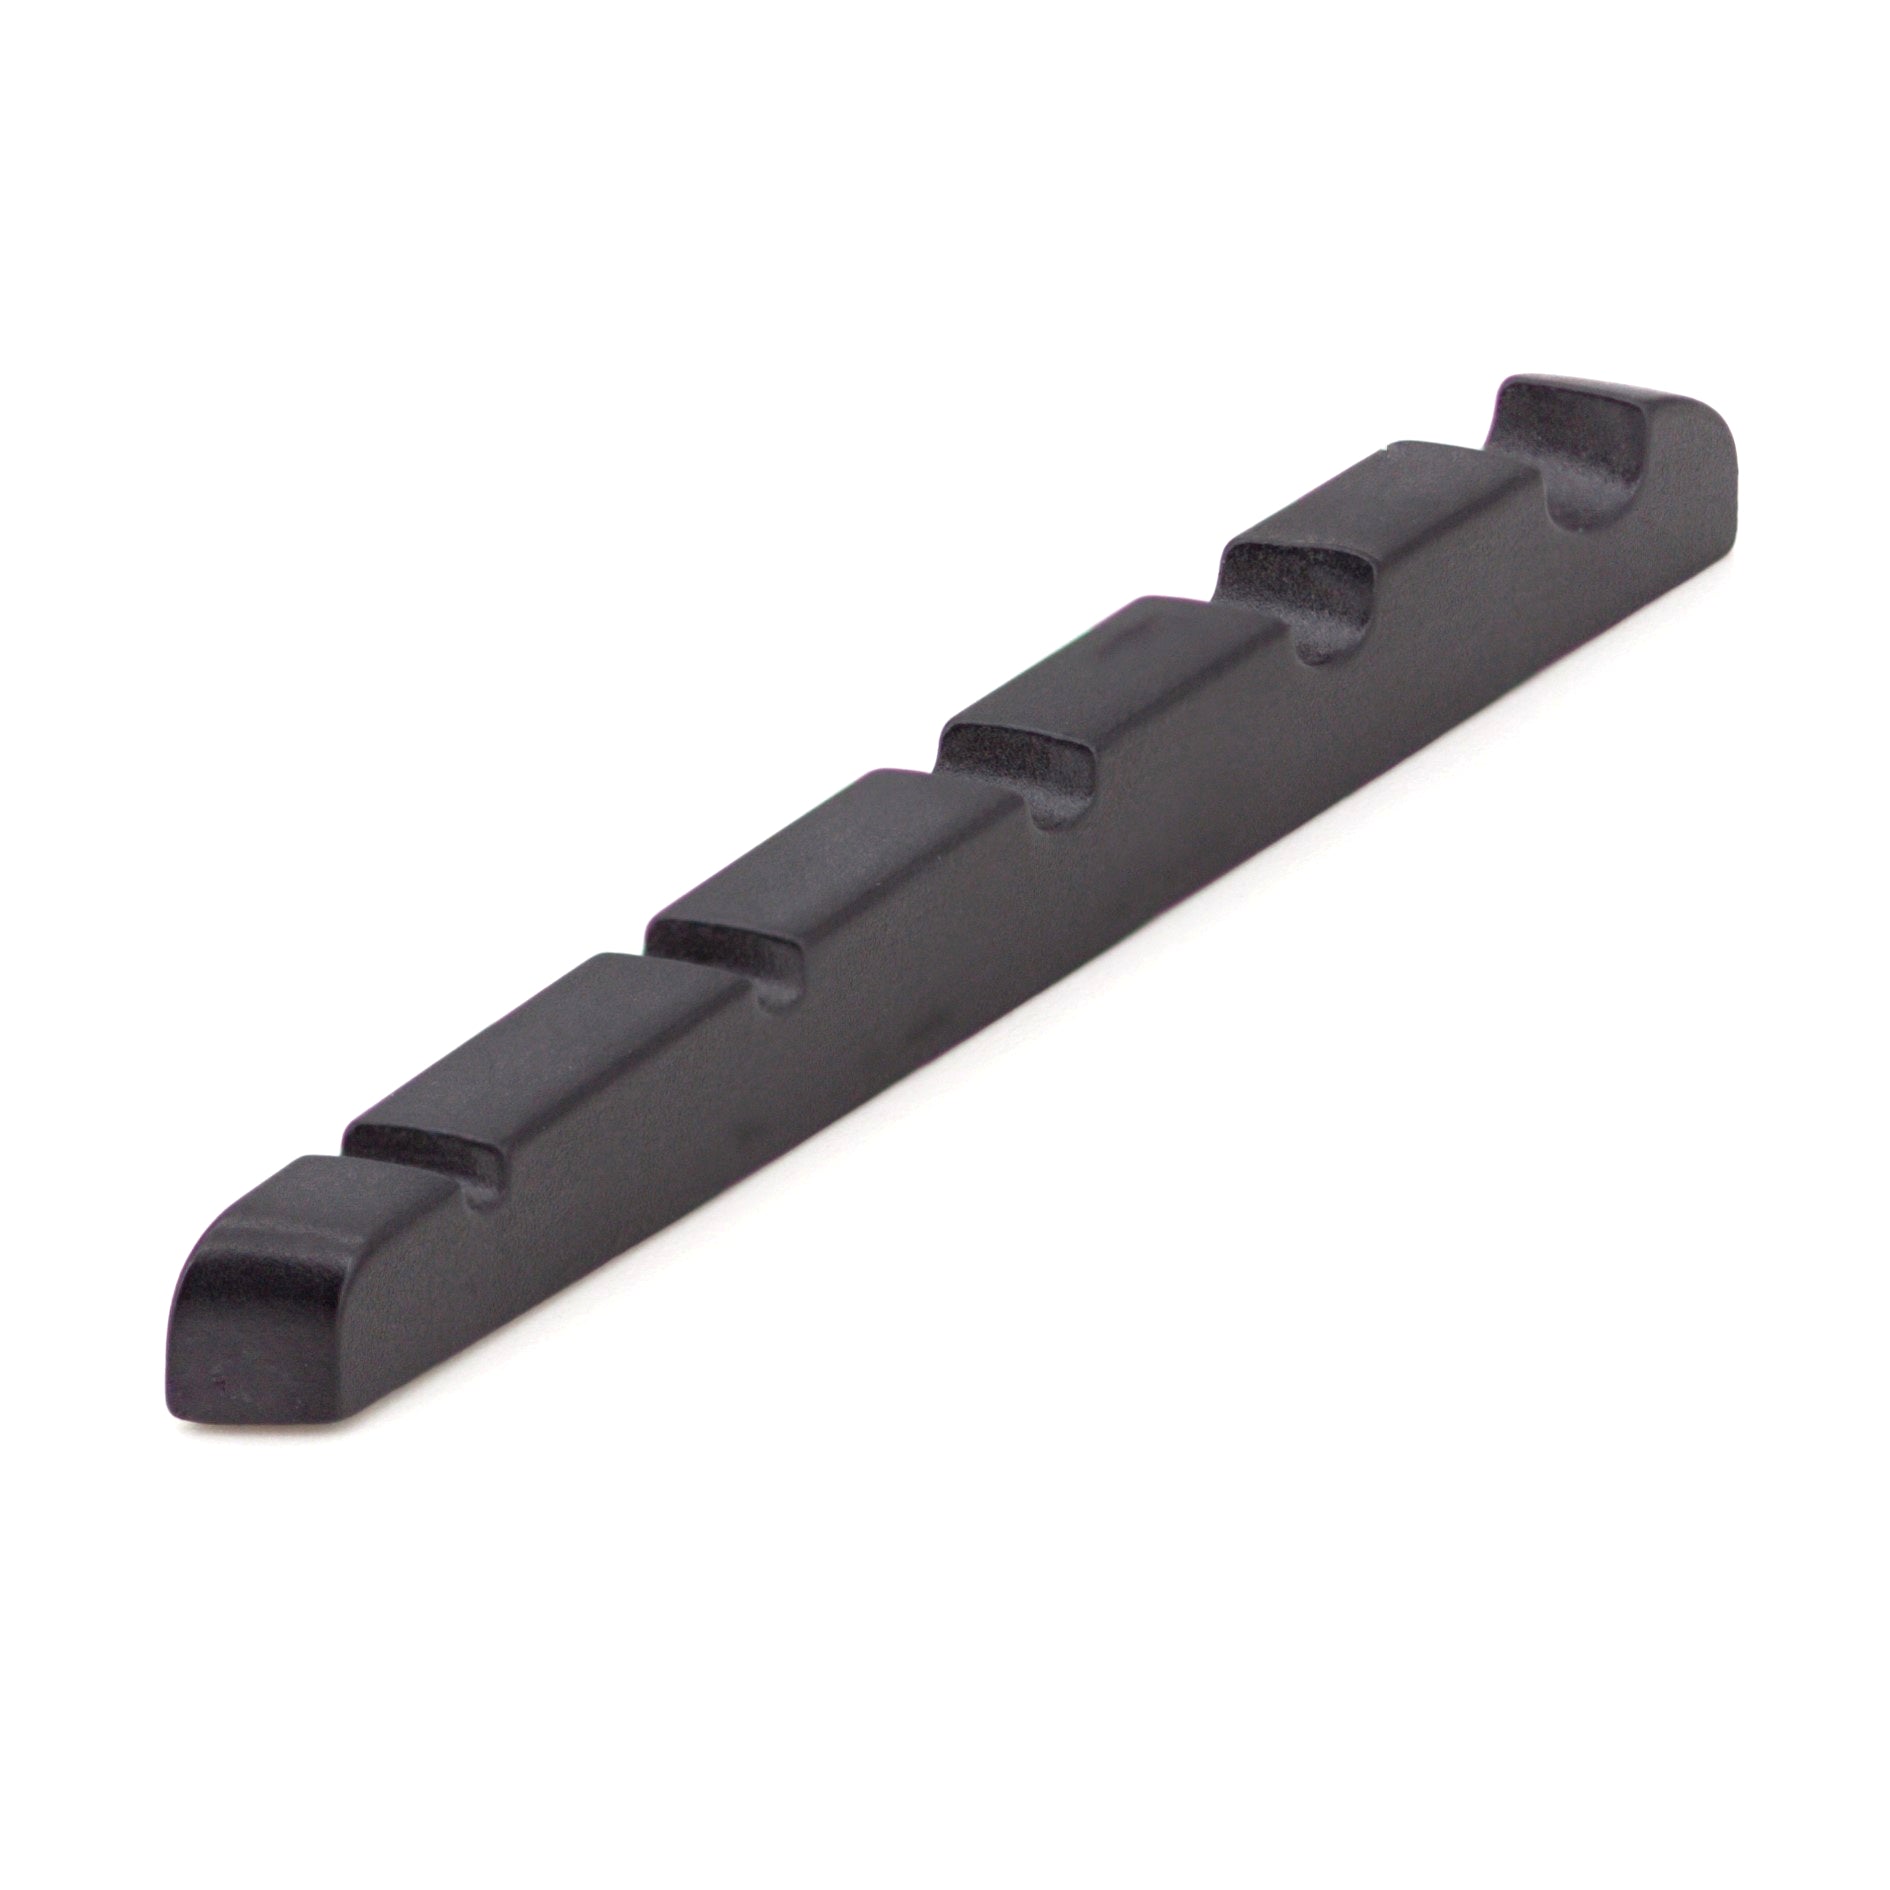 Model 5306-00 Nut Slotted Multi-Scale L57.30mm